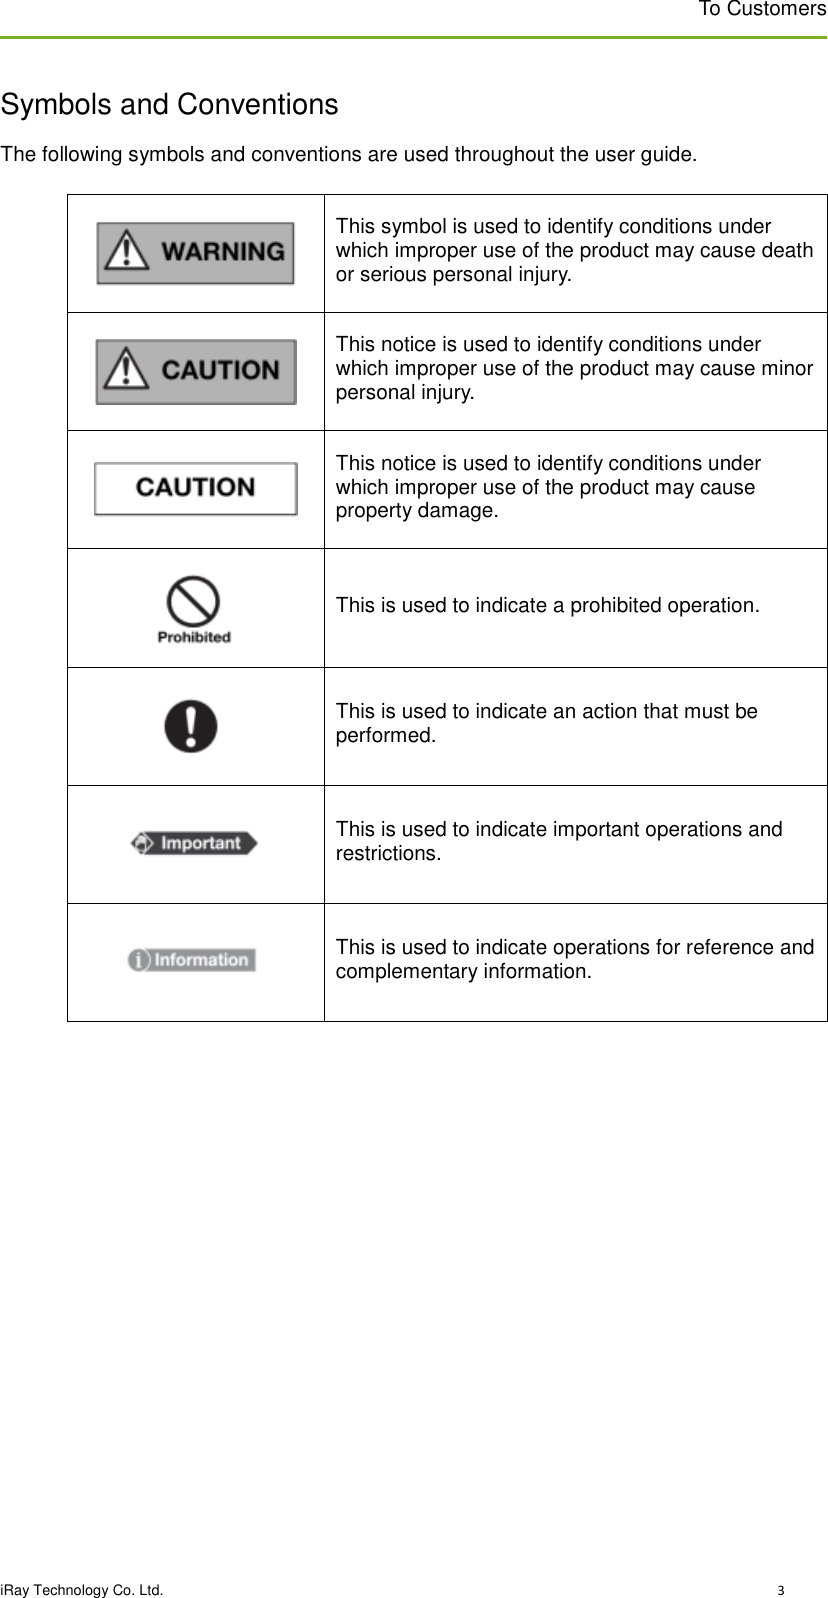 To Customers iRay Technology Co. Ltd.                                                                                                                                                                                          3 Symbols and Conventions The following symbols and conventions are used throughout the user guide.  This symbol is used to identify conditions under which improper use of the product may cause death or serious personal injury.  This notice is used to identify conditions under which improper use of the product may cause minor personal injury.  This notice is used to identify conditions under which improper use of the product may cause property damage.  This is used to indicate a prohibited operation.  This is used to indicate an action that must be performed.  This is used to indicate important operations and restrictions.  This is used to indicate operations for reference and complementary information.         